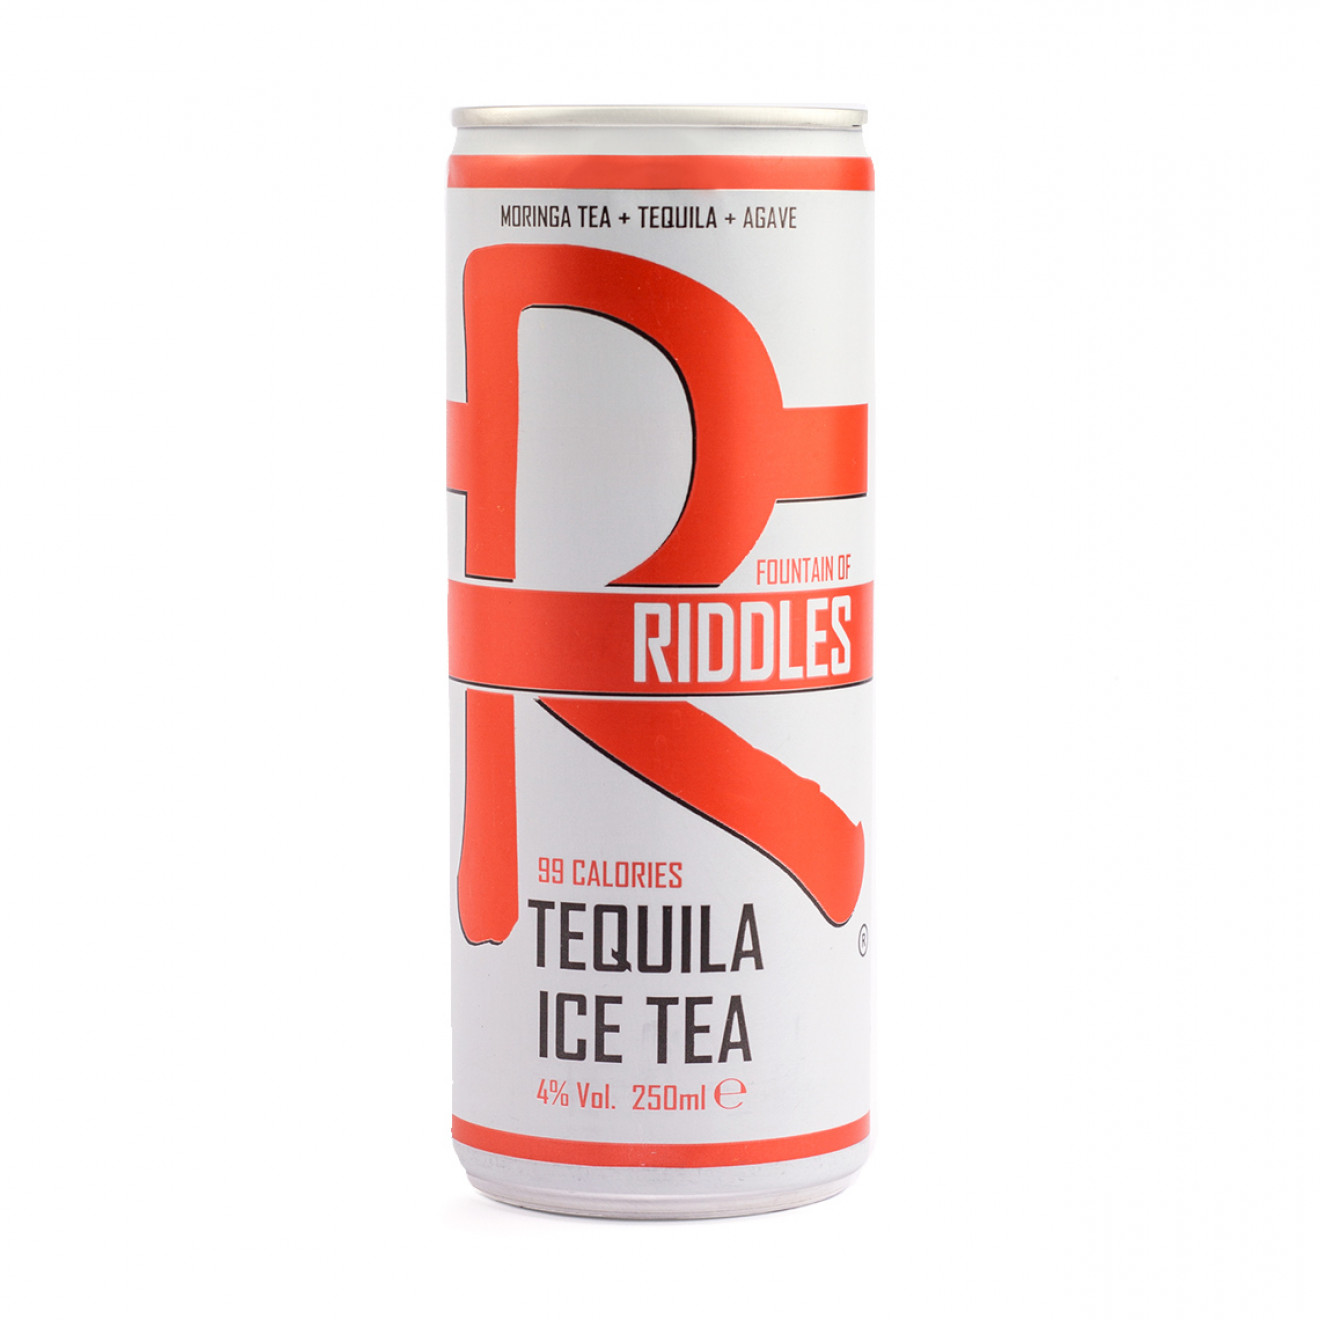 Riddles Tequila Ice Tea - 250ml